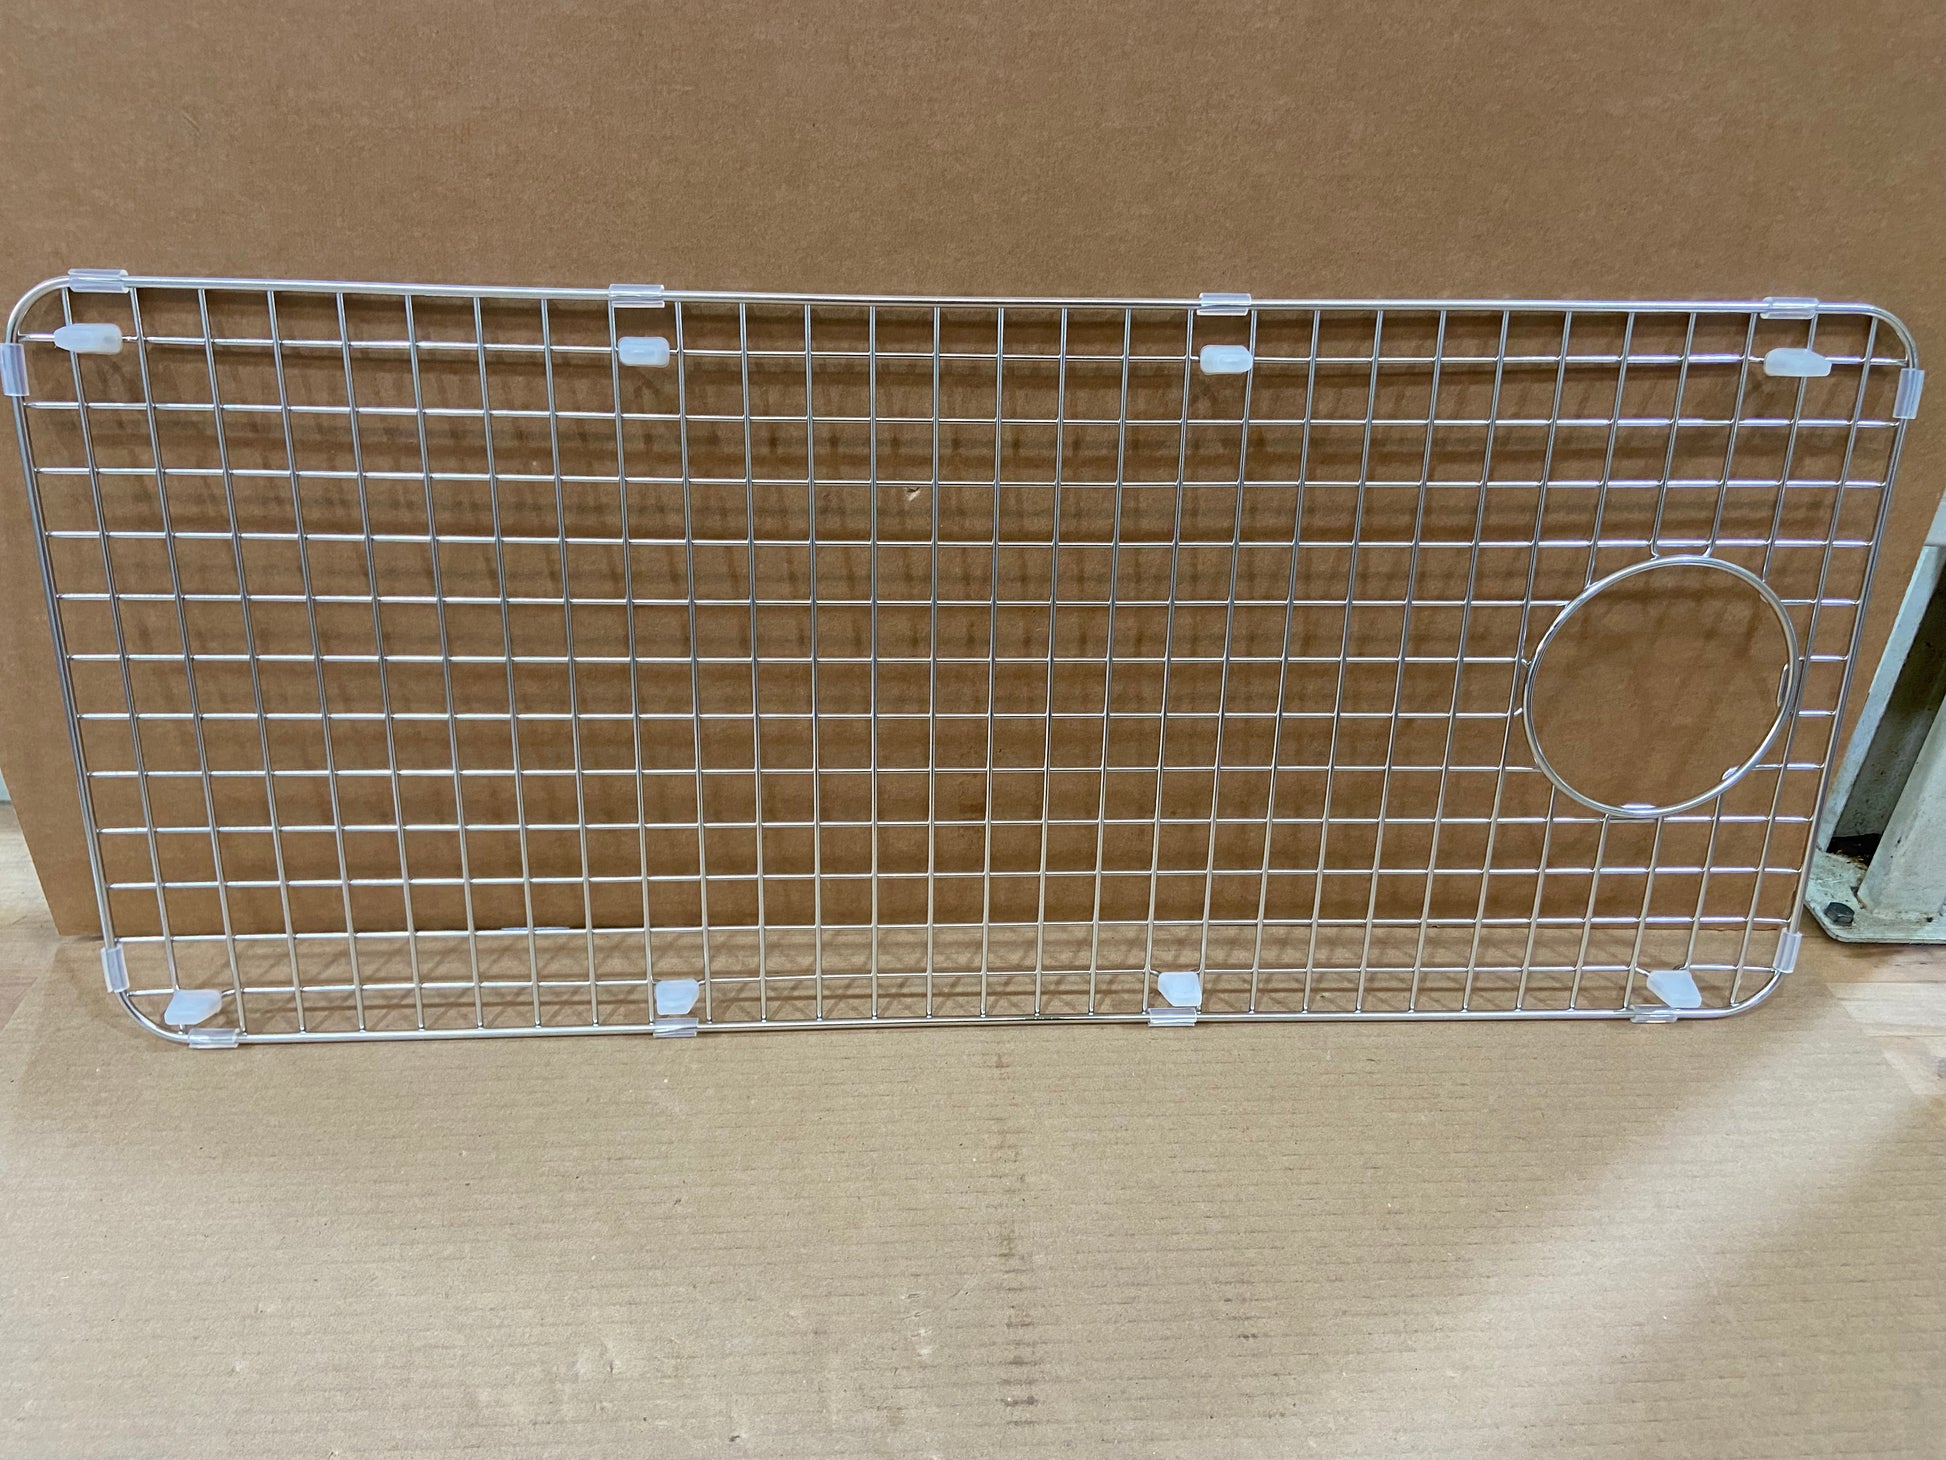 31 1/4" X 13 1/2" STAINLESS STEEL RACK FOR 36" SINK